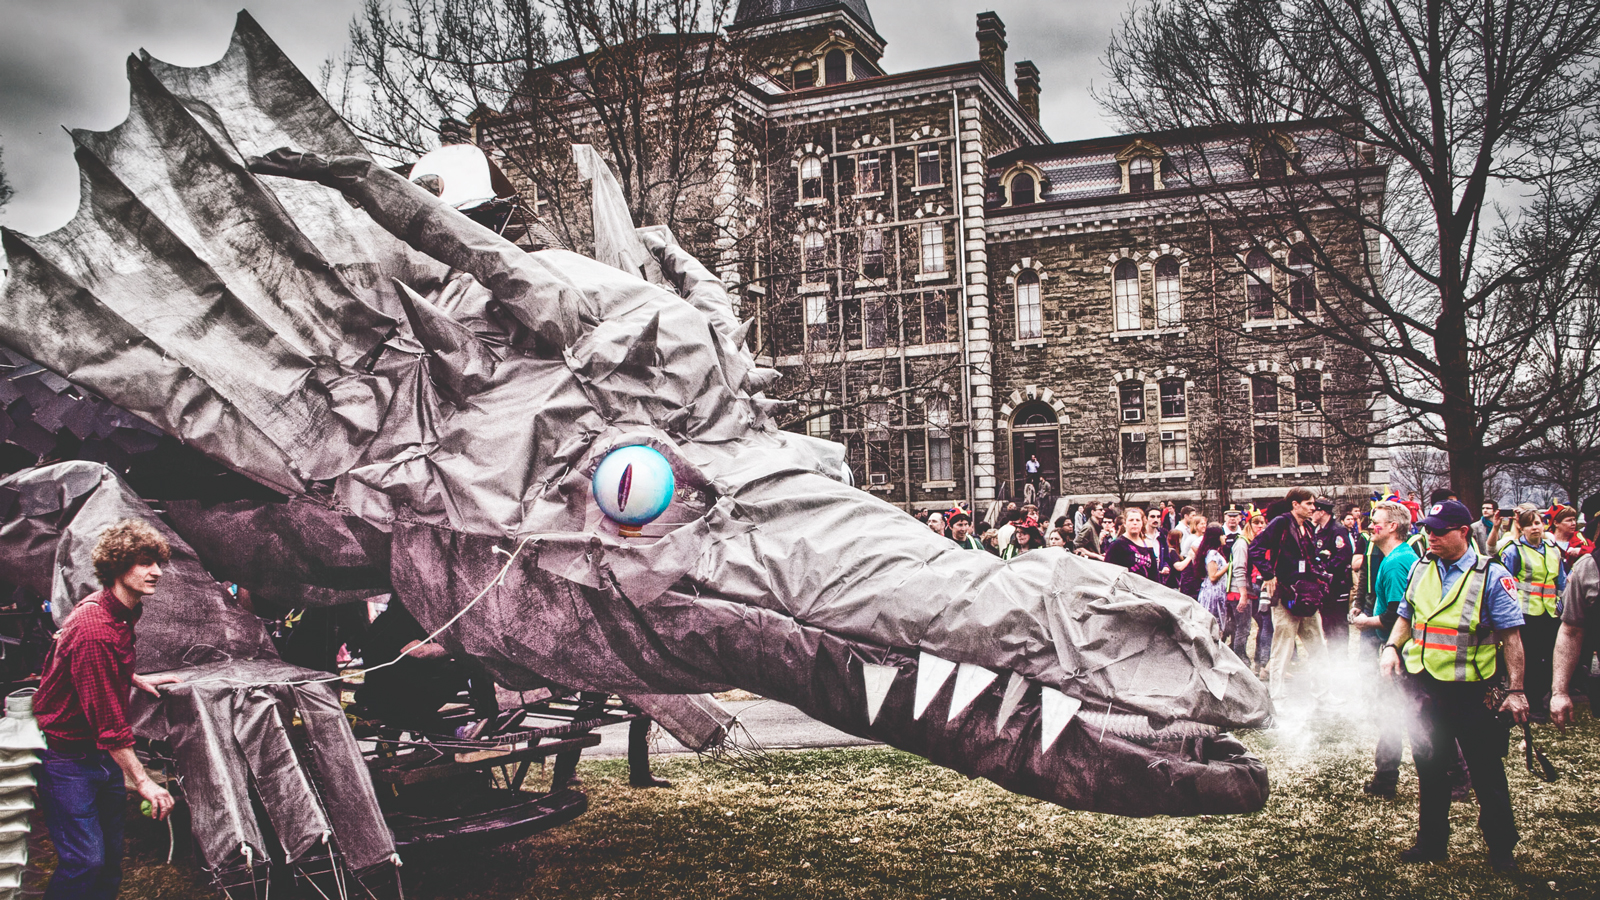 The 2012 dragon blows a puff of smoke on the Arts Quad